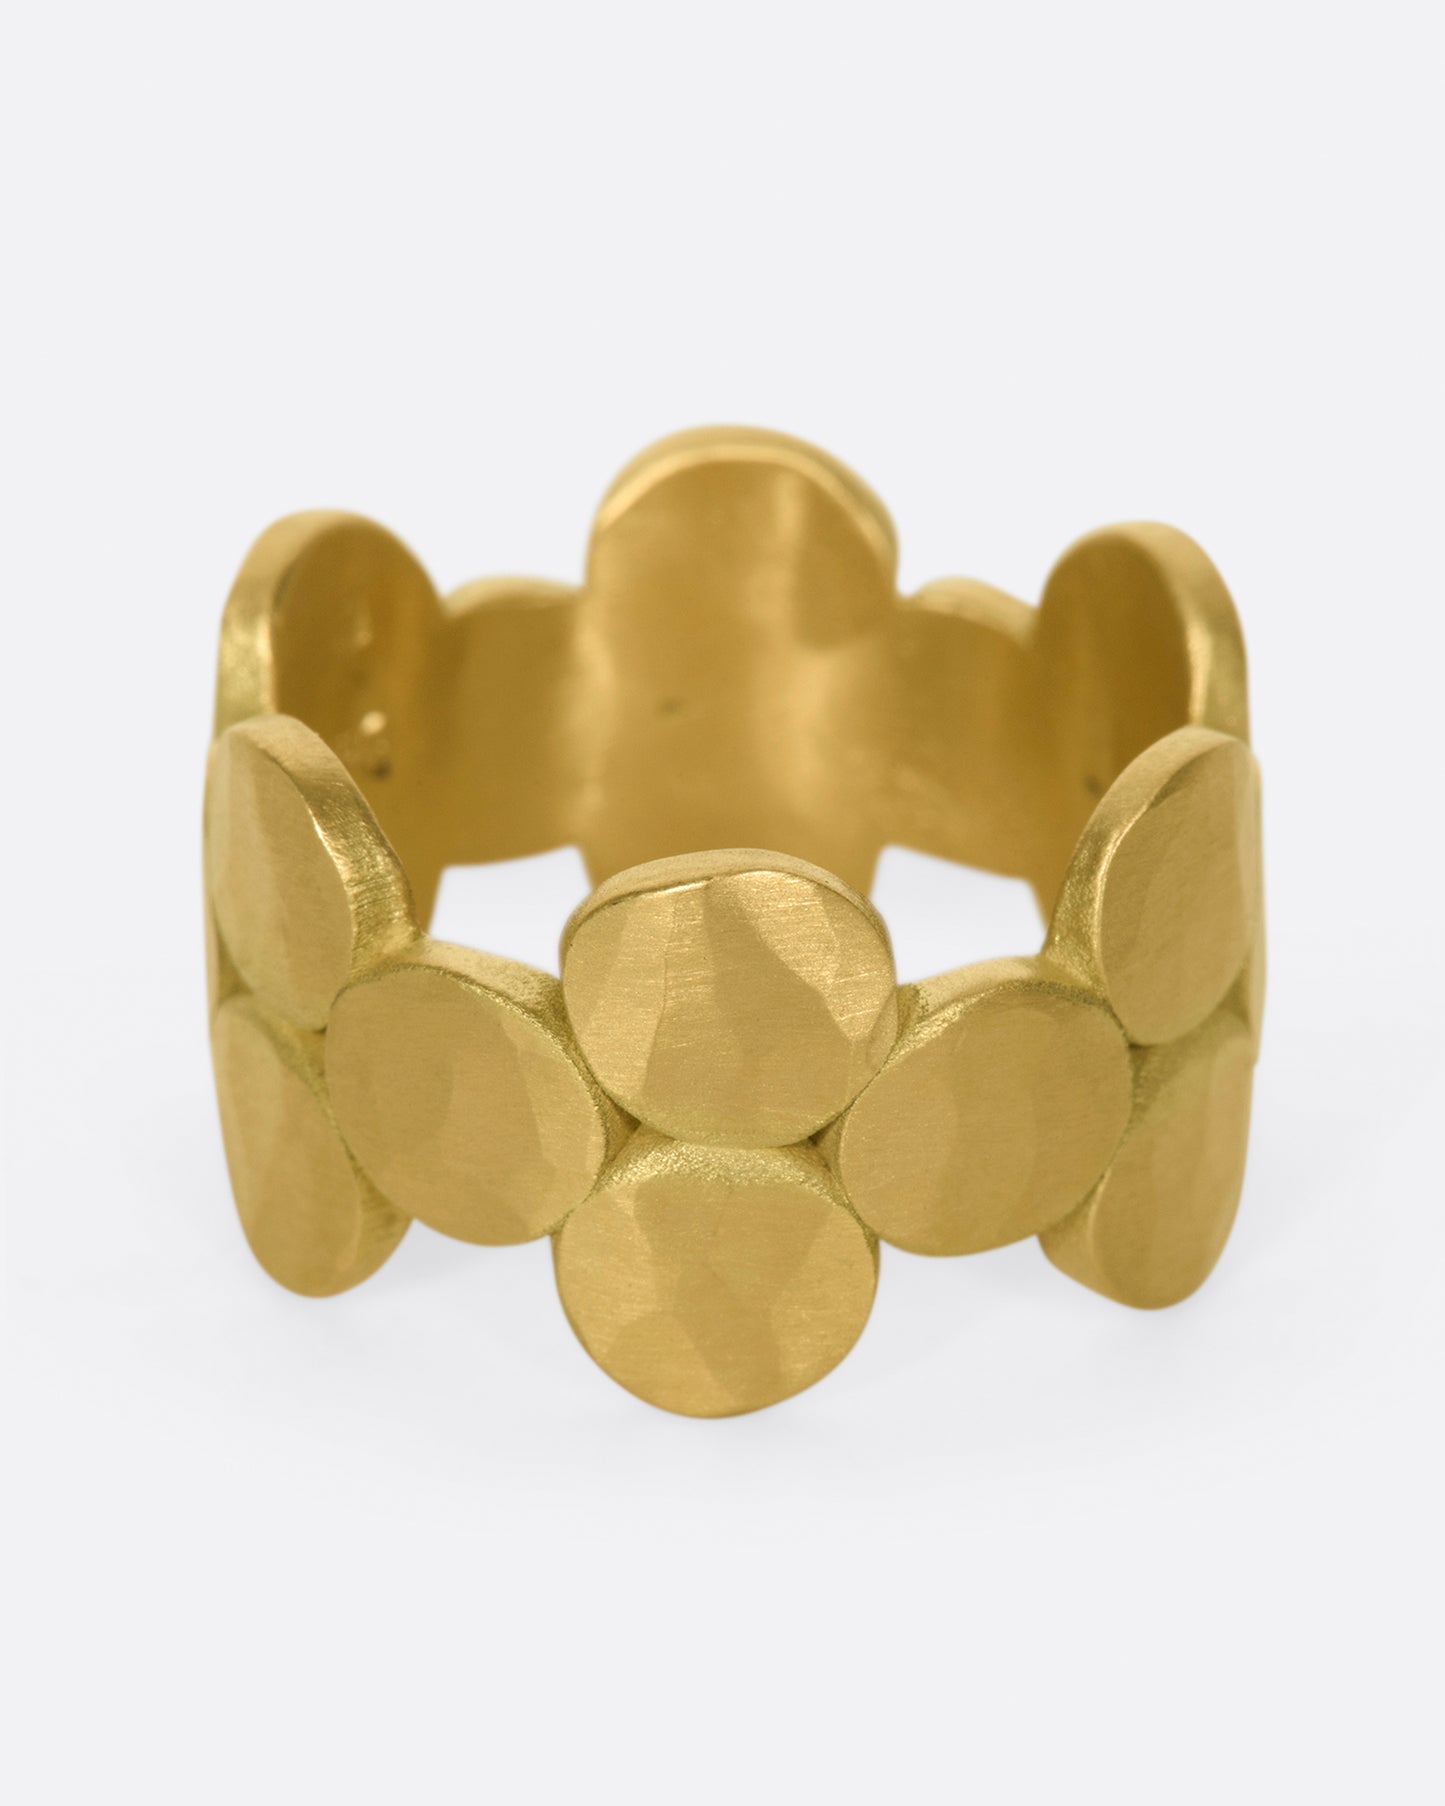 An incredible statement ring that's both comfortable and very wearable.